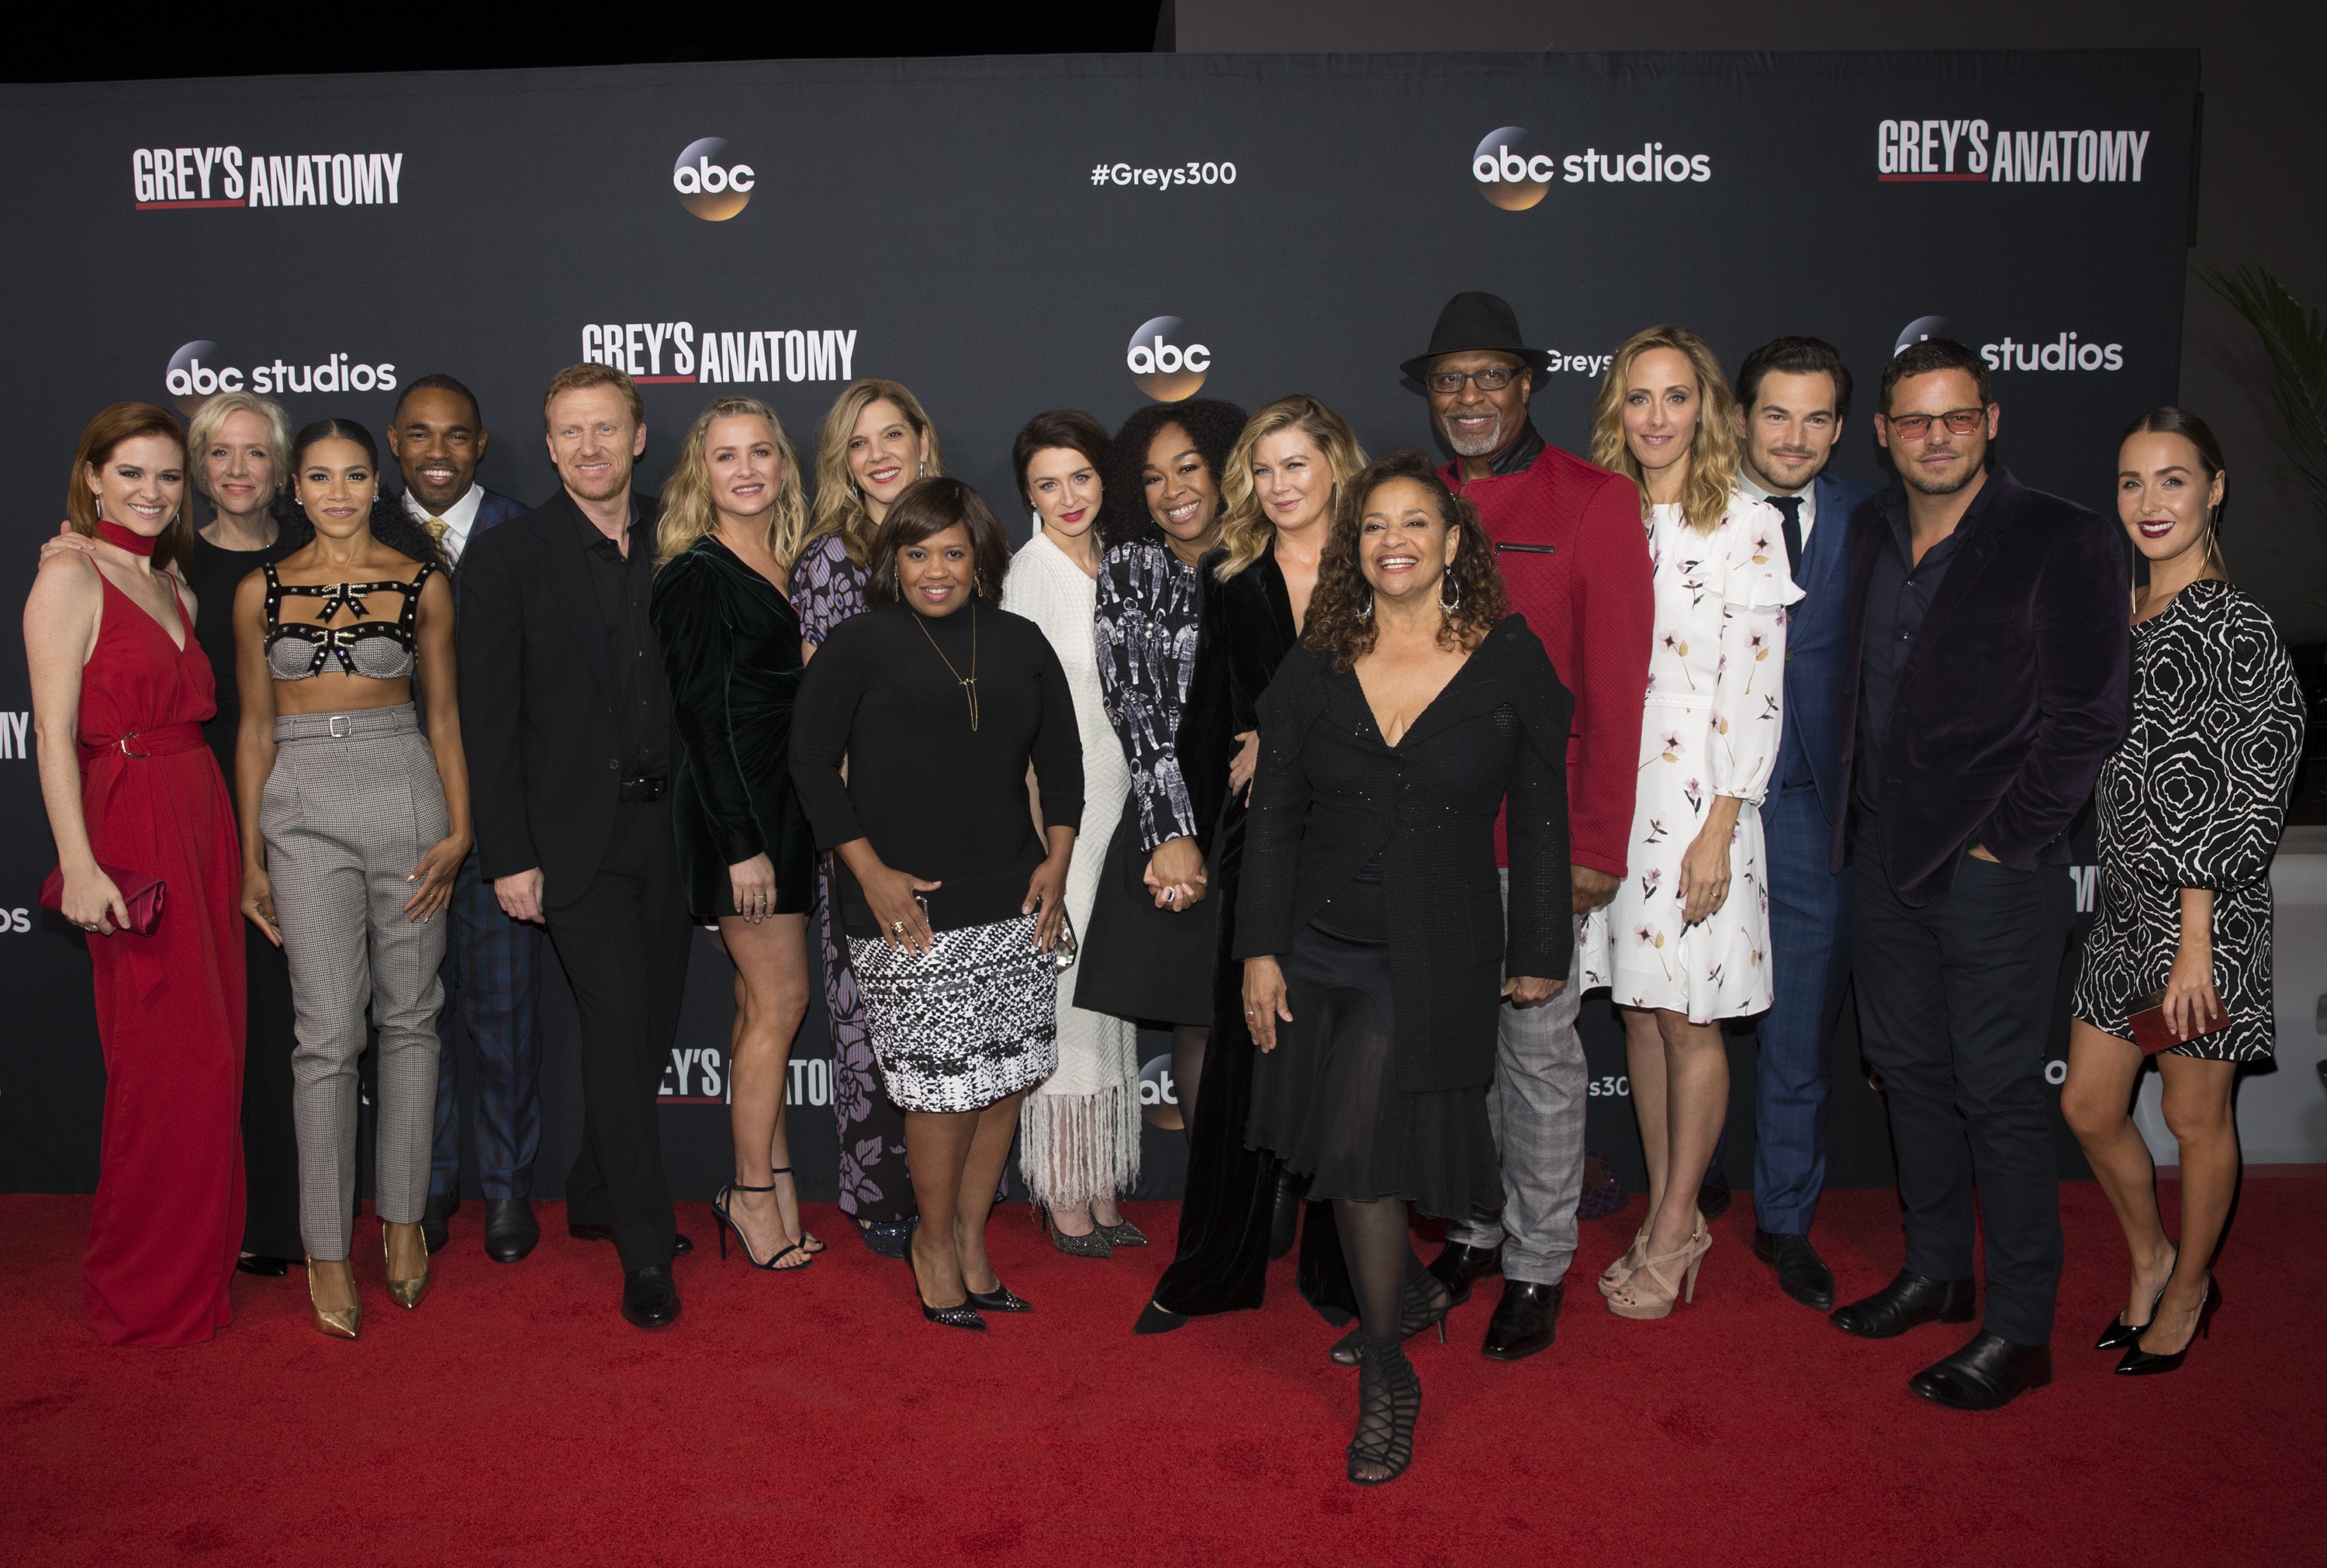 'Grey's Anatomy' Cast and Executive producers